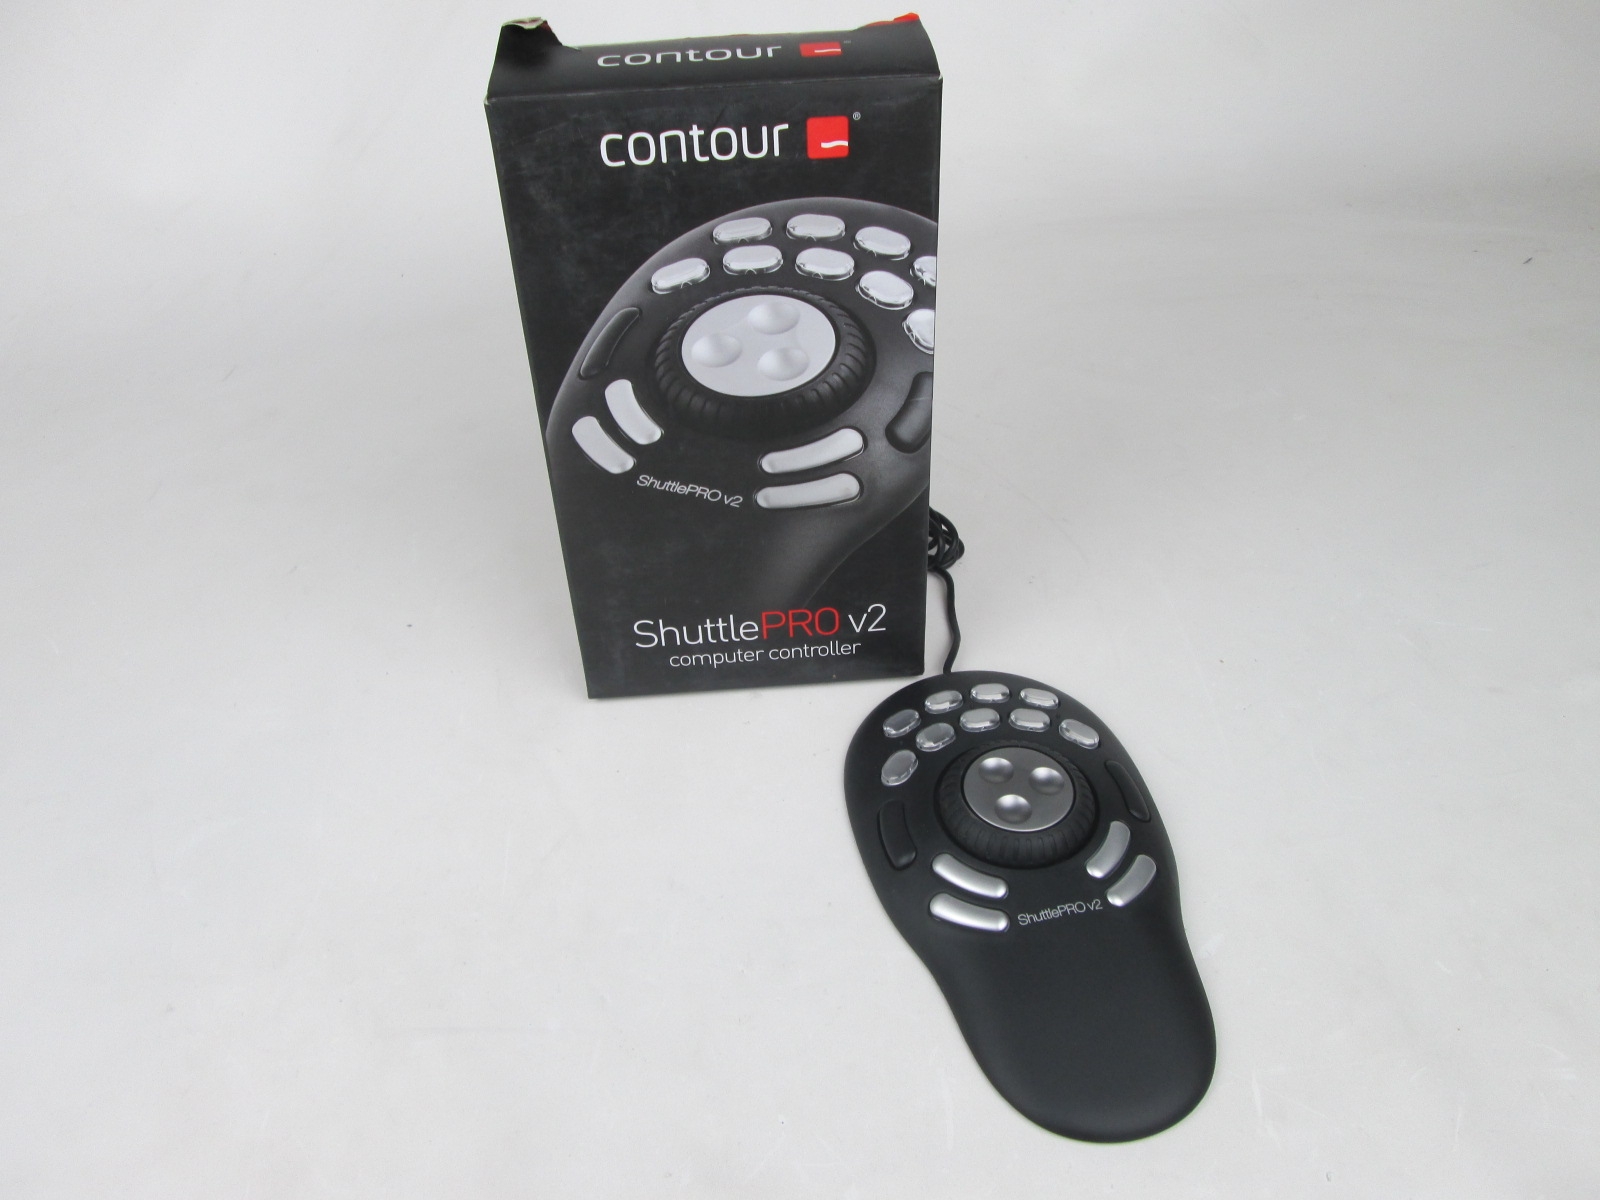 controllermate and contour shurttle pro